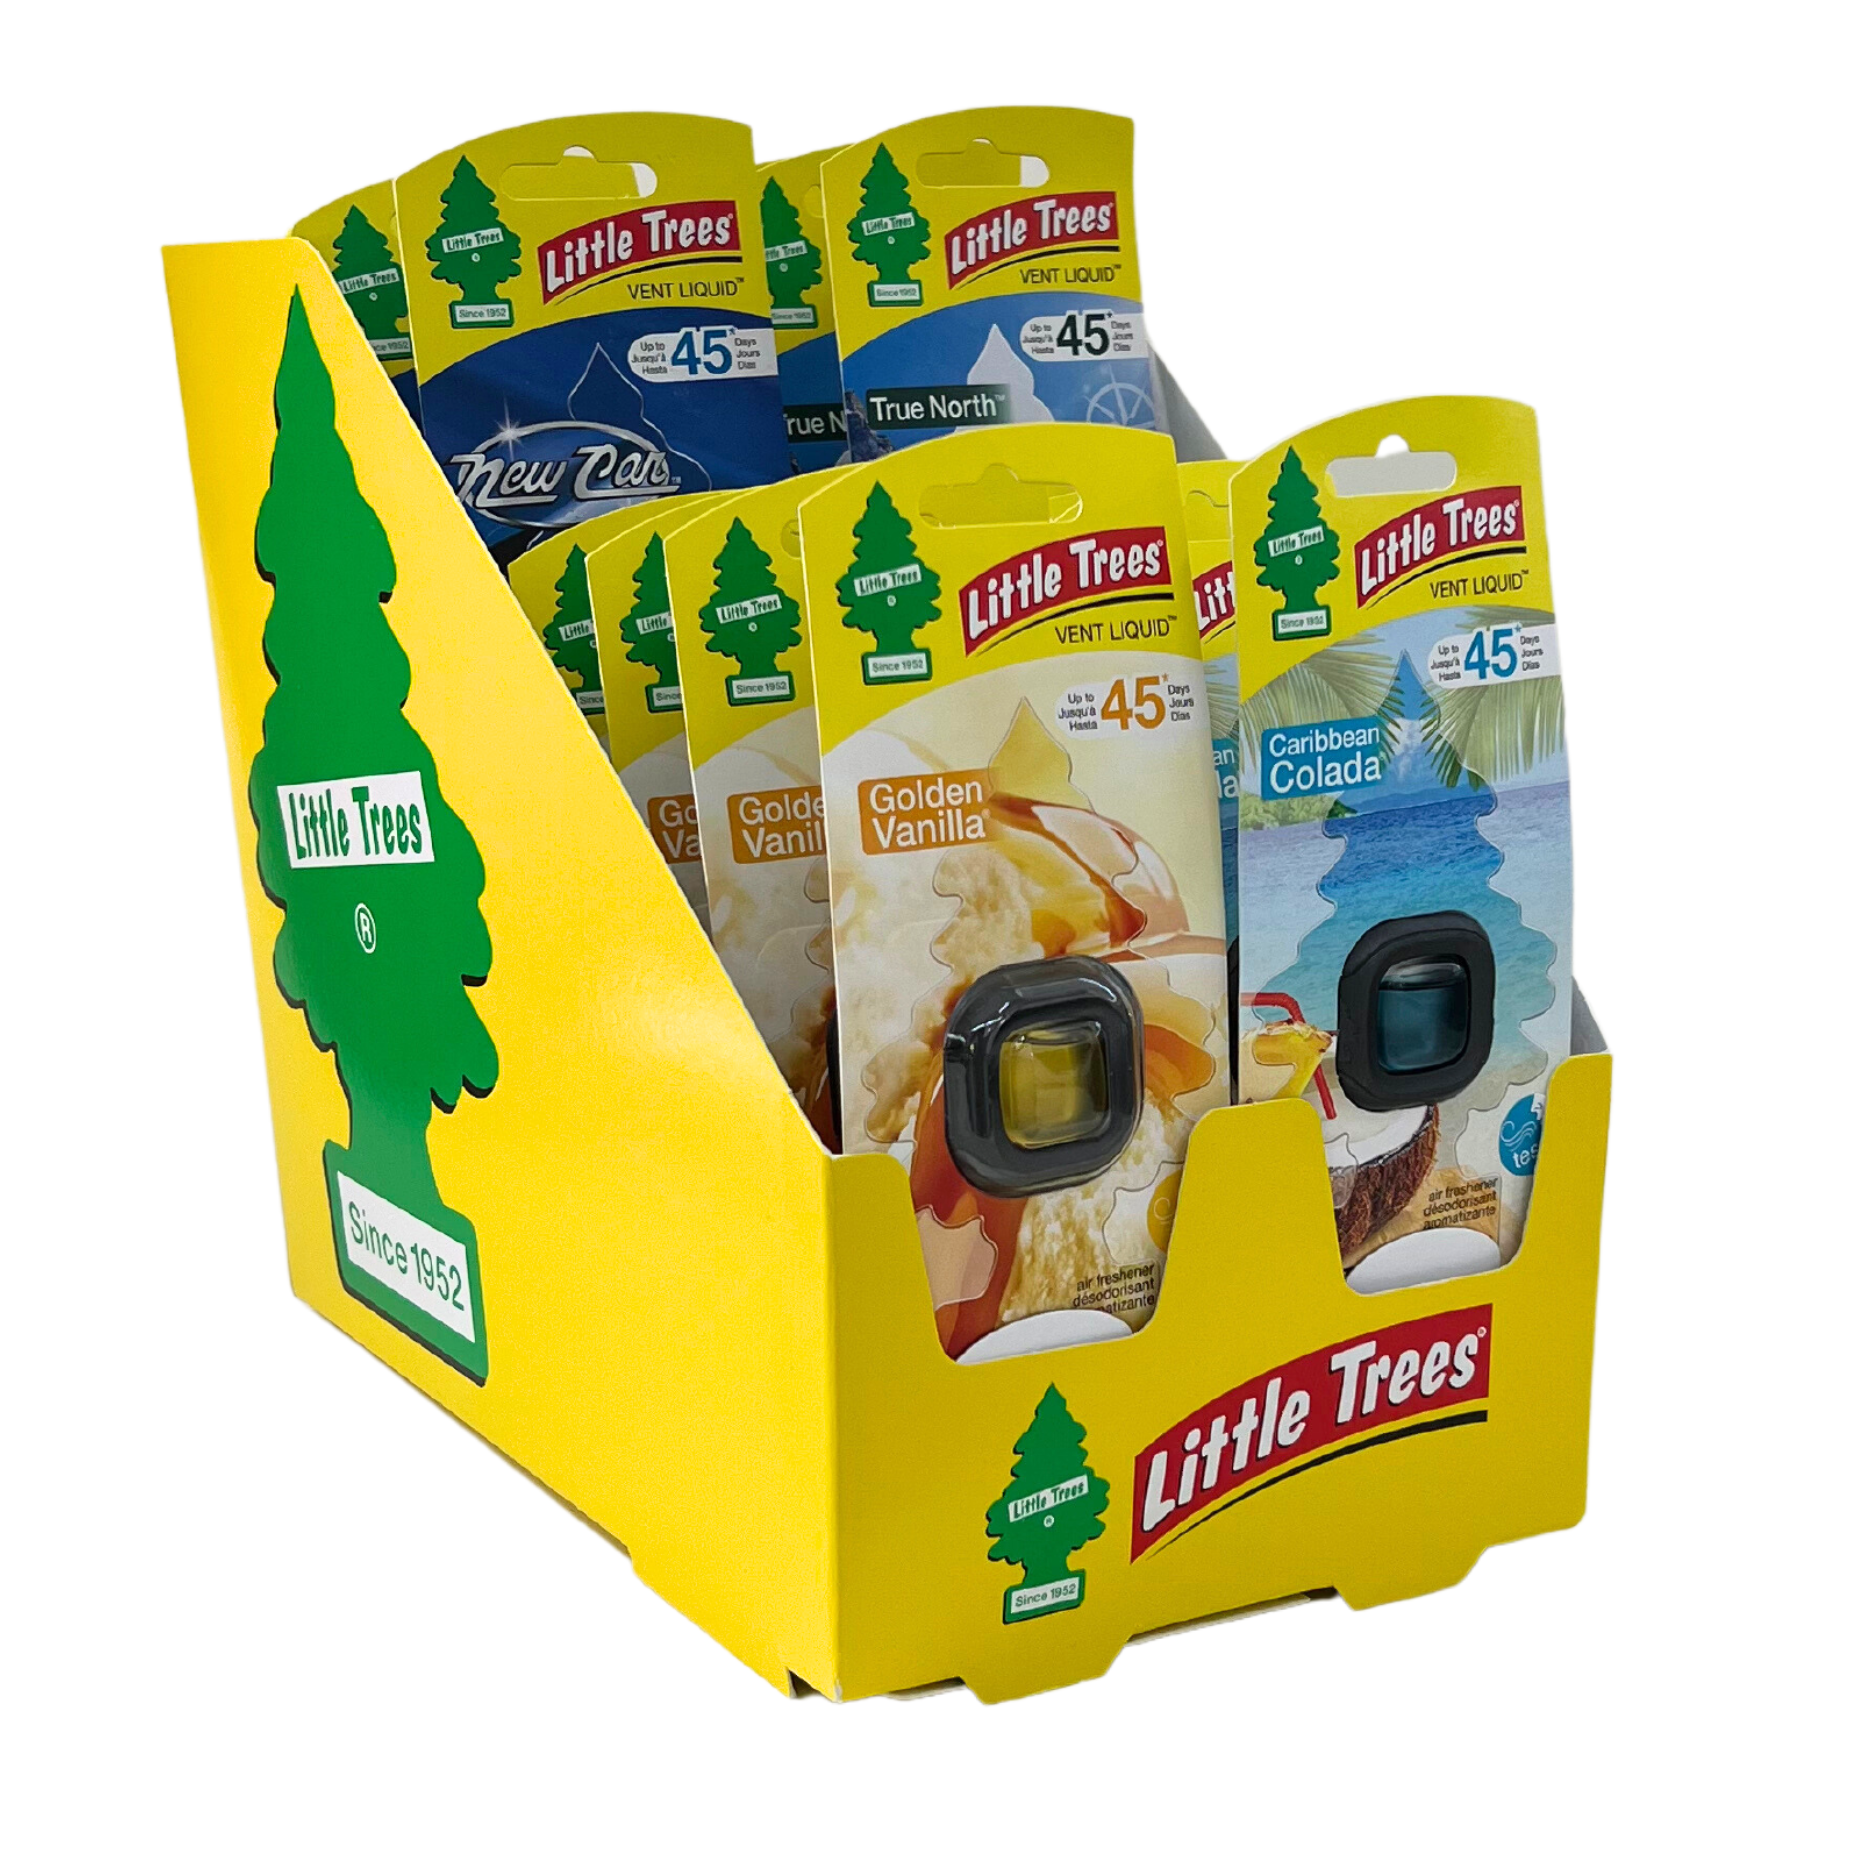  LITTLE TREES Car Air Freshener. Vent Liquid Provides  Long-Lasting Scent for Auto or Home. Add a Splash of LITTLE TREES to your  Vent. New Car Scent, 4 Air Fresheners : Everything